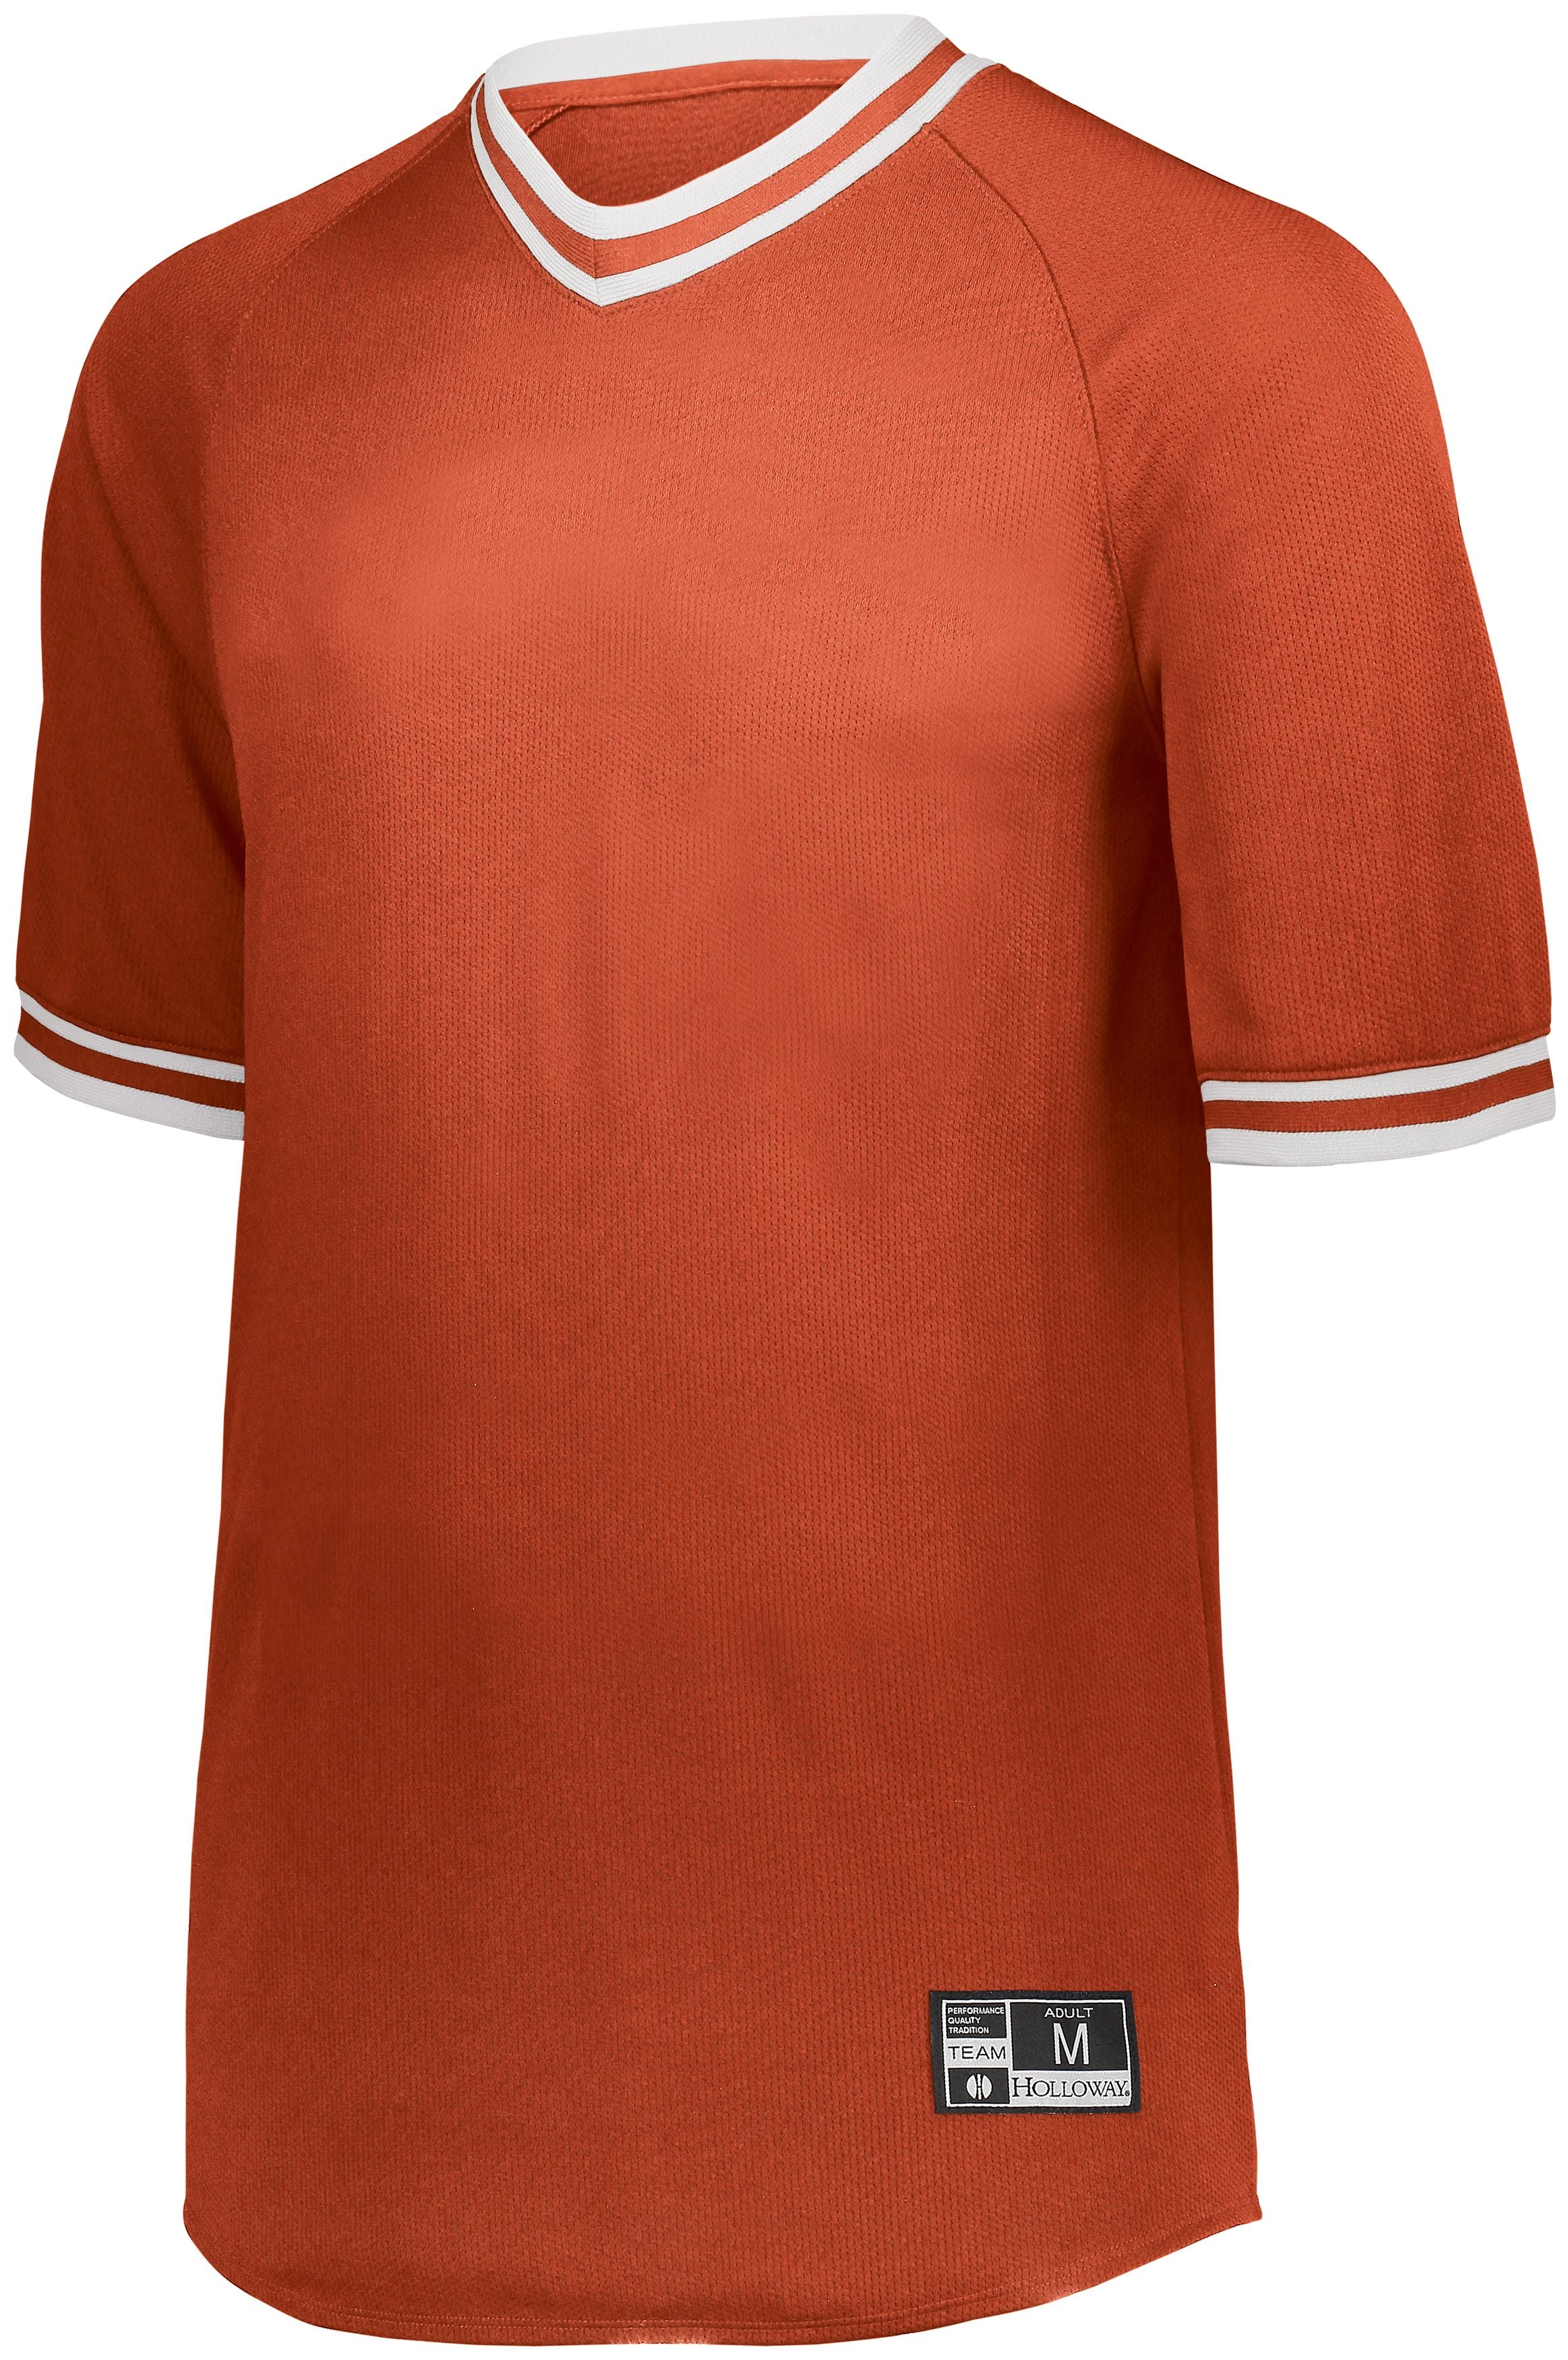 Holloway Retro V-Neck Baseball Jersey in Orange/White  -Part of the Adult, Adult-Jersey, Baseball, Holloway, Shirts, All-Sports, All-Sports-1 product lines at KanaleyCreations.com